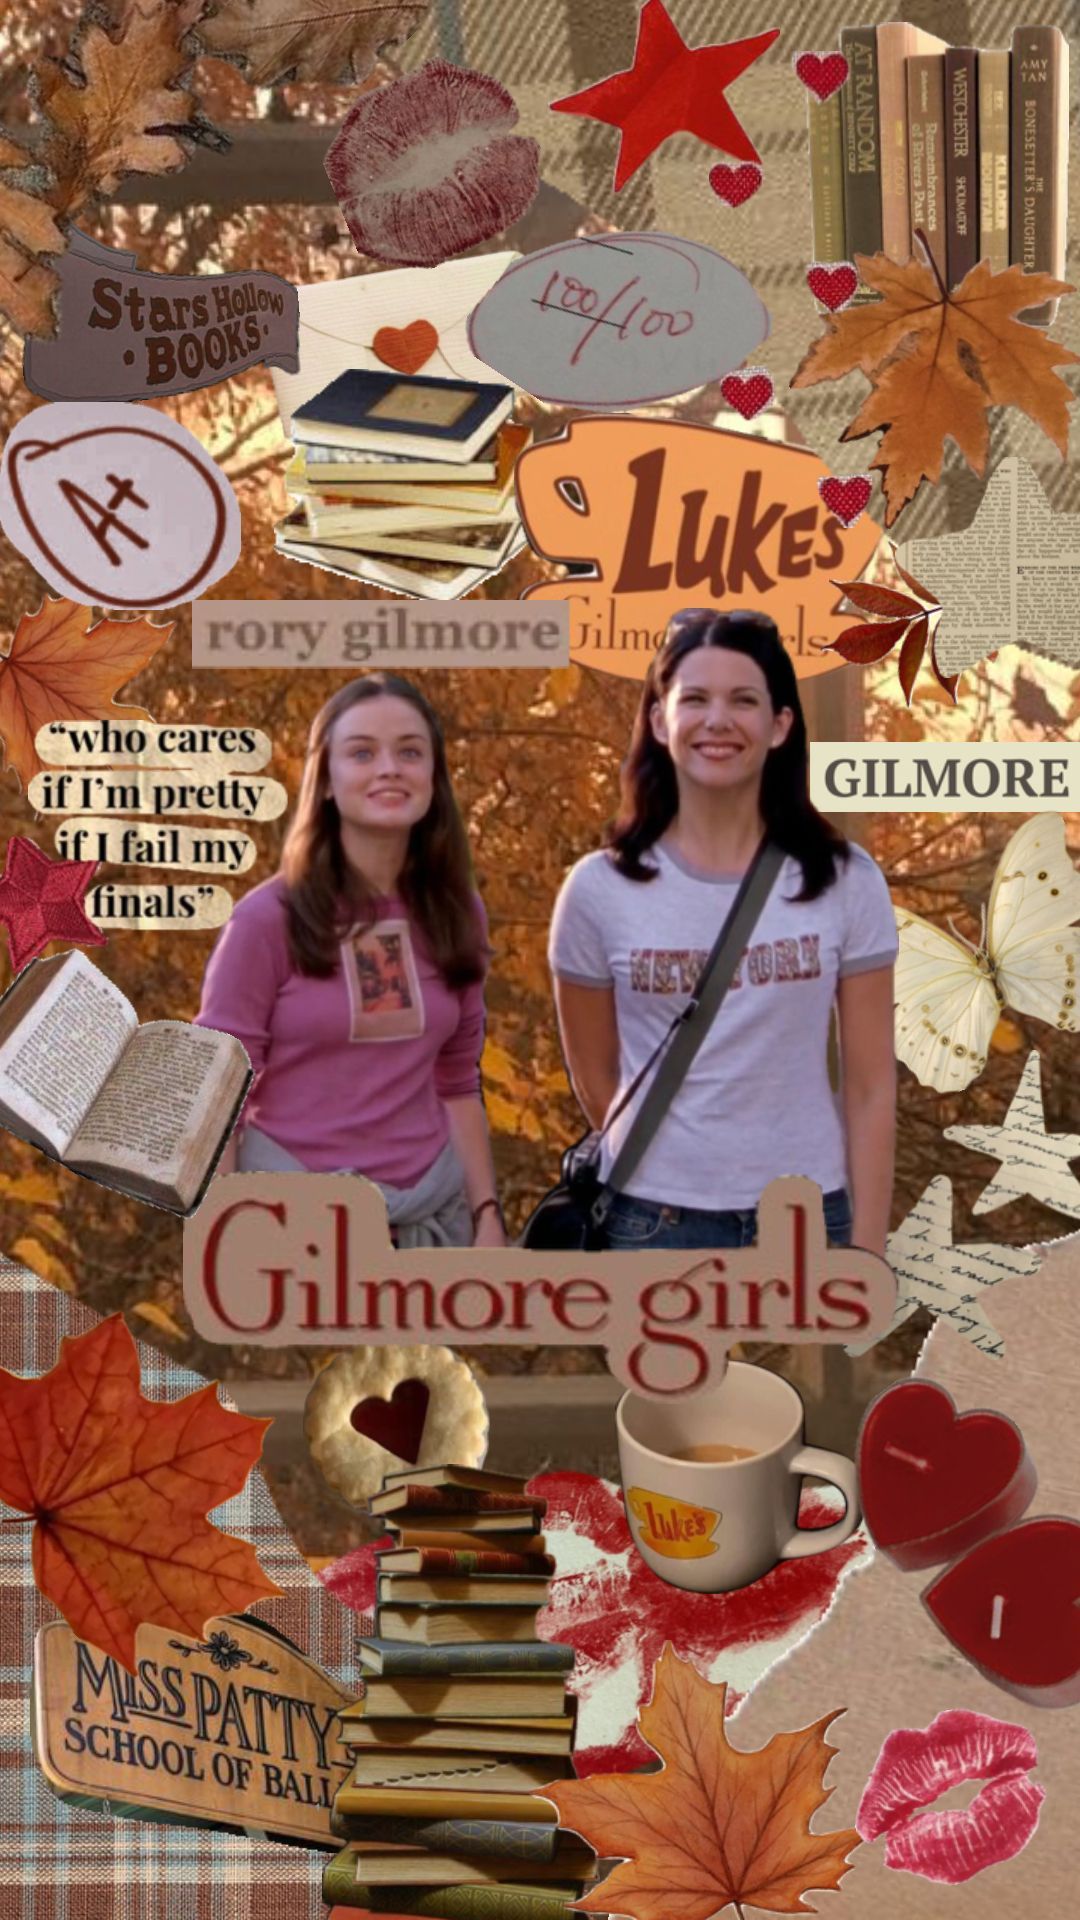 Gilmore girls wallpaper I made! Credit to the original artist for the picture - Harvard